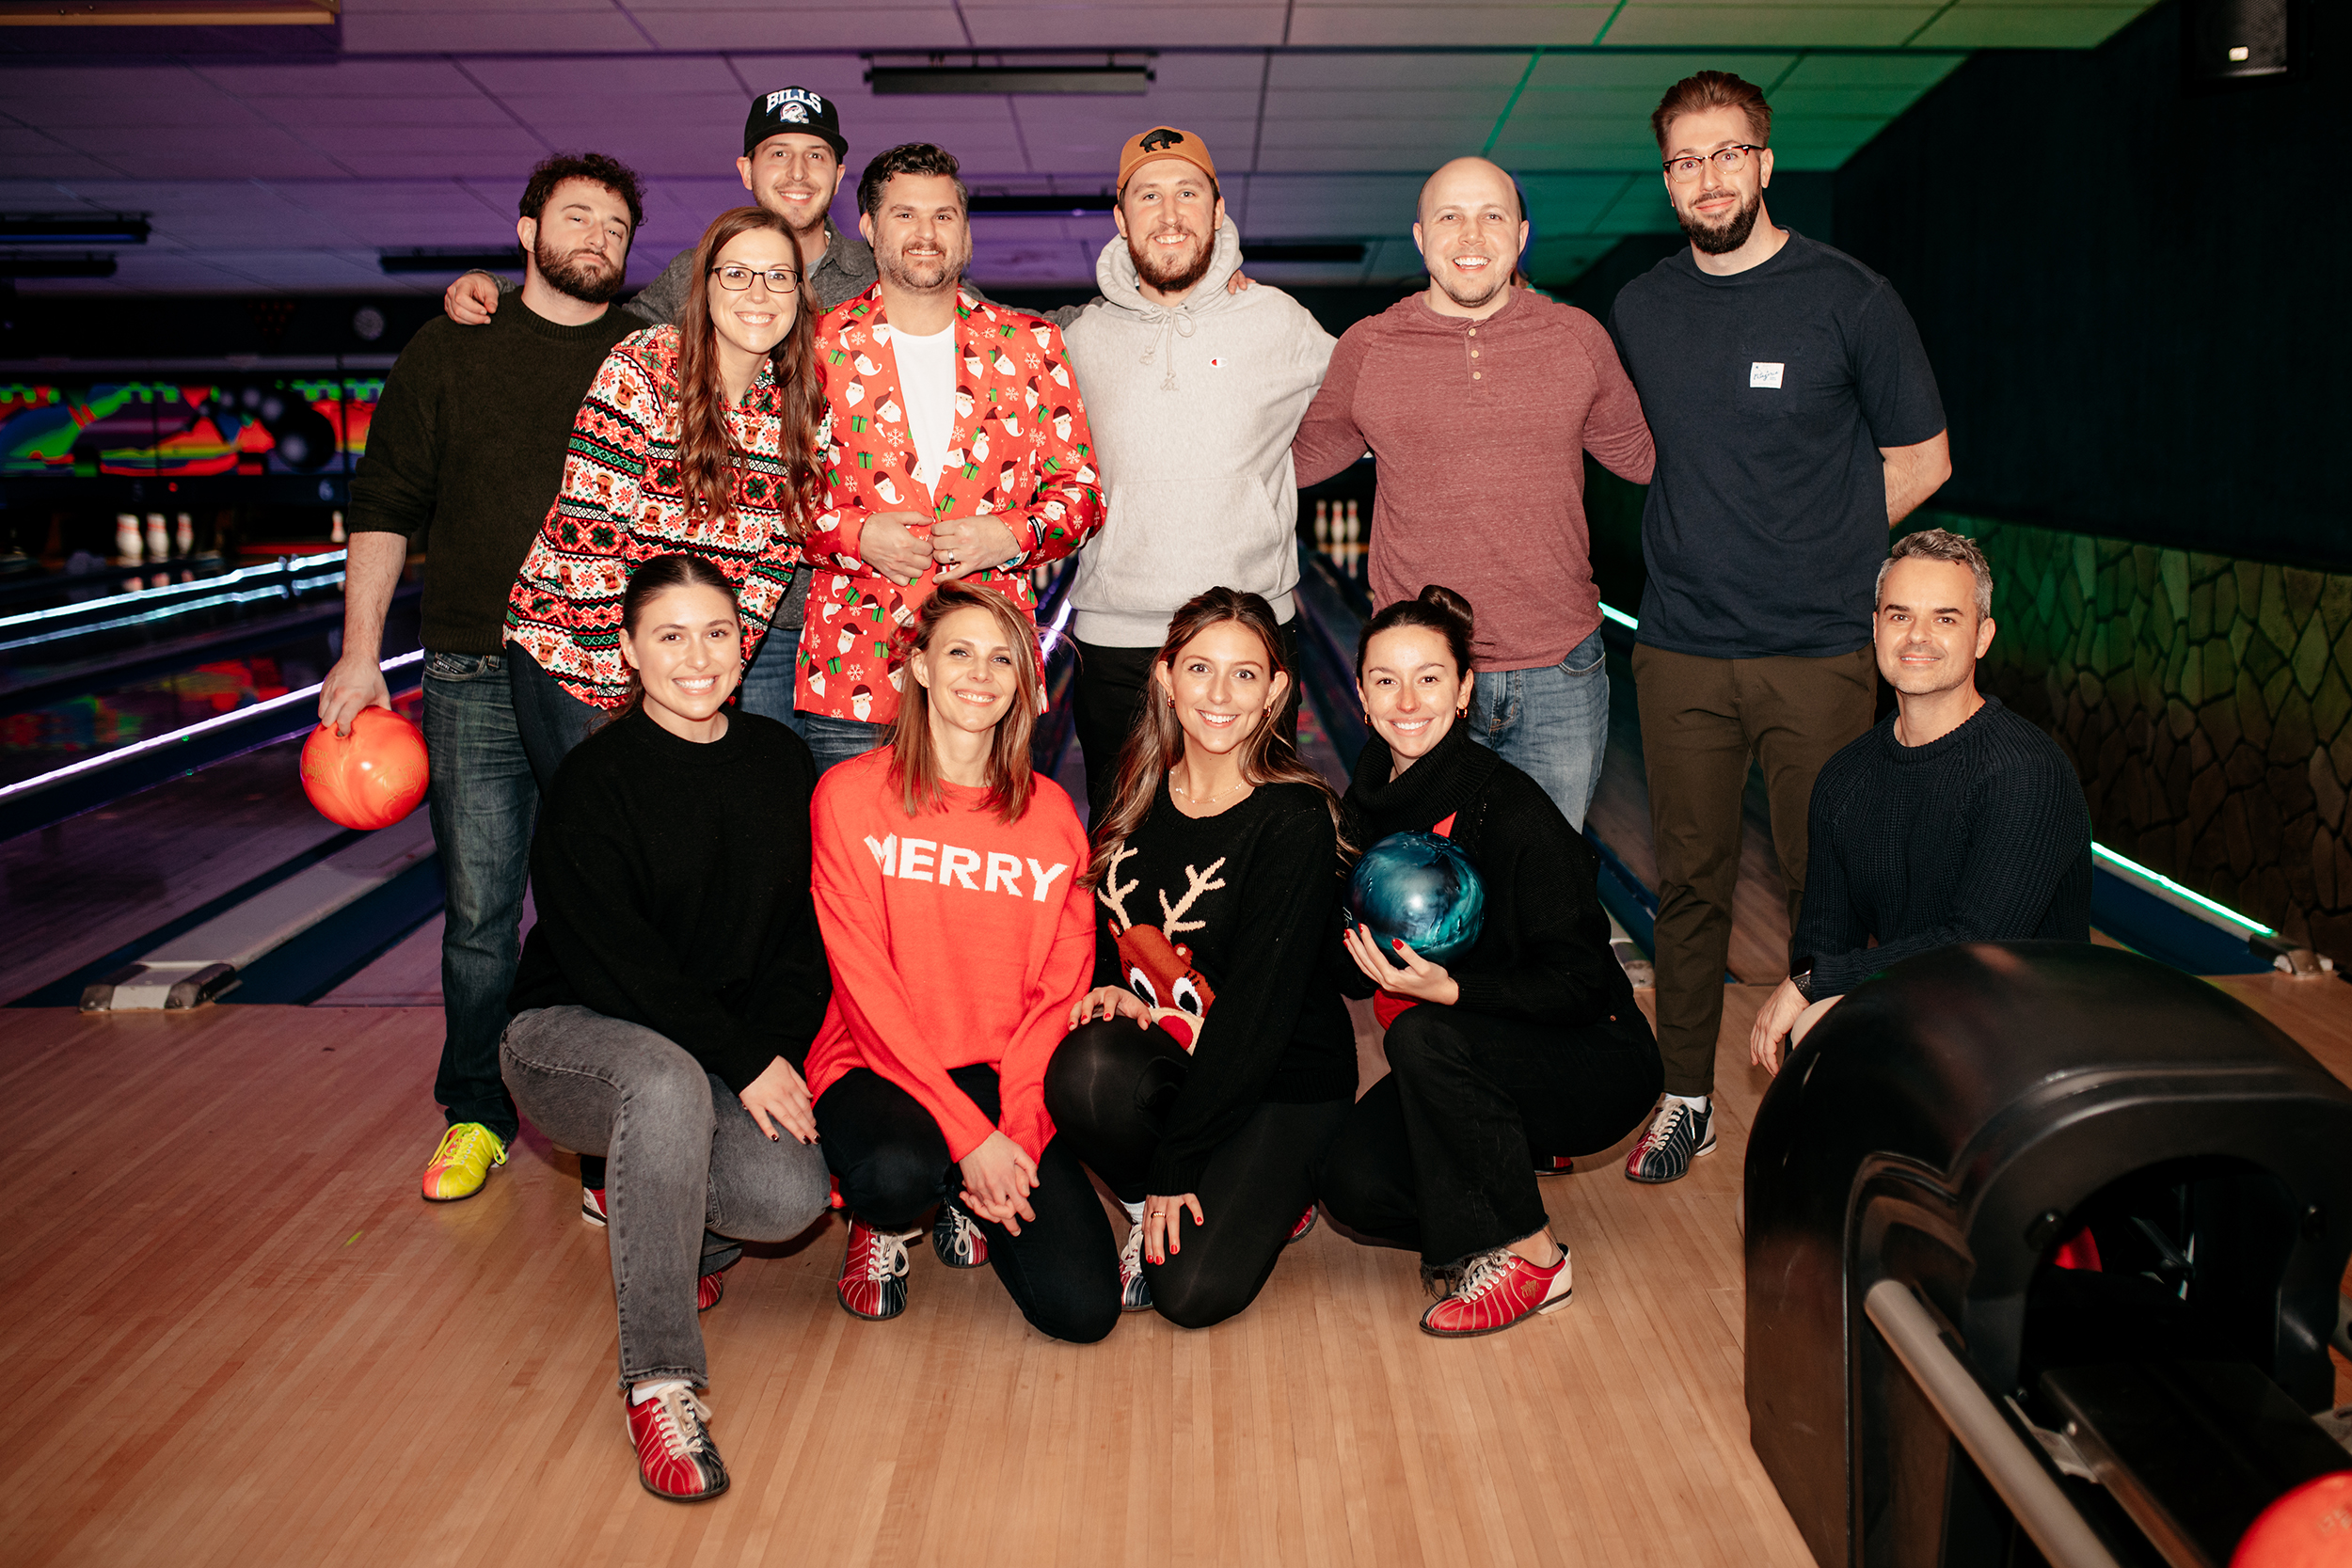 Agency members huddled together for holiday bowling fundraiser.